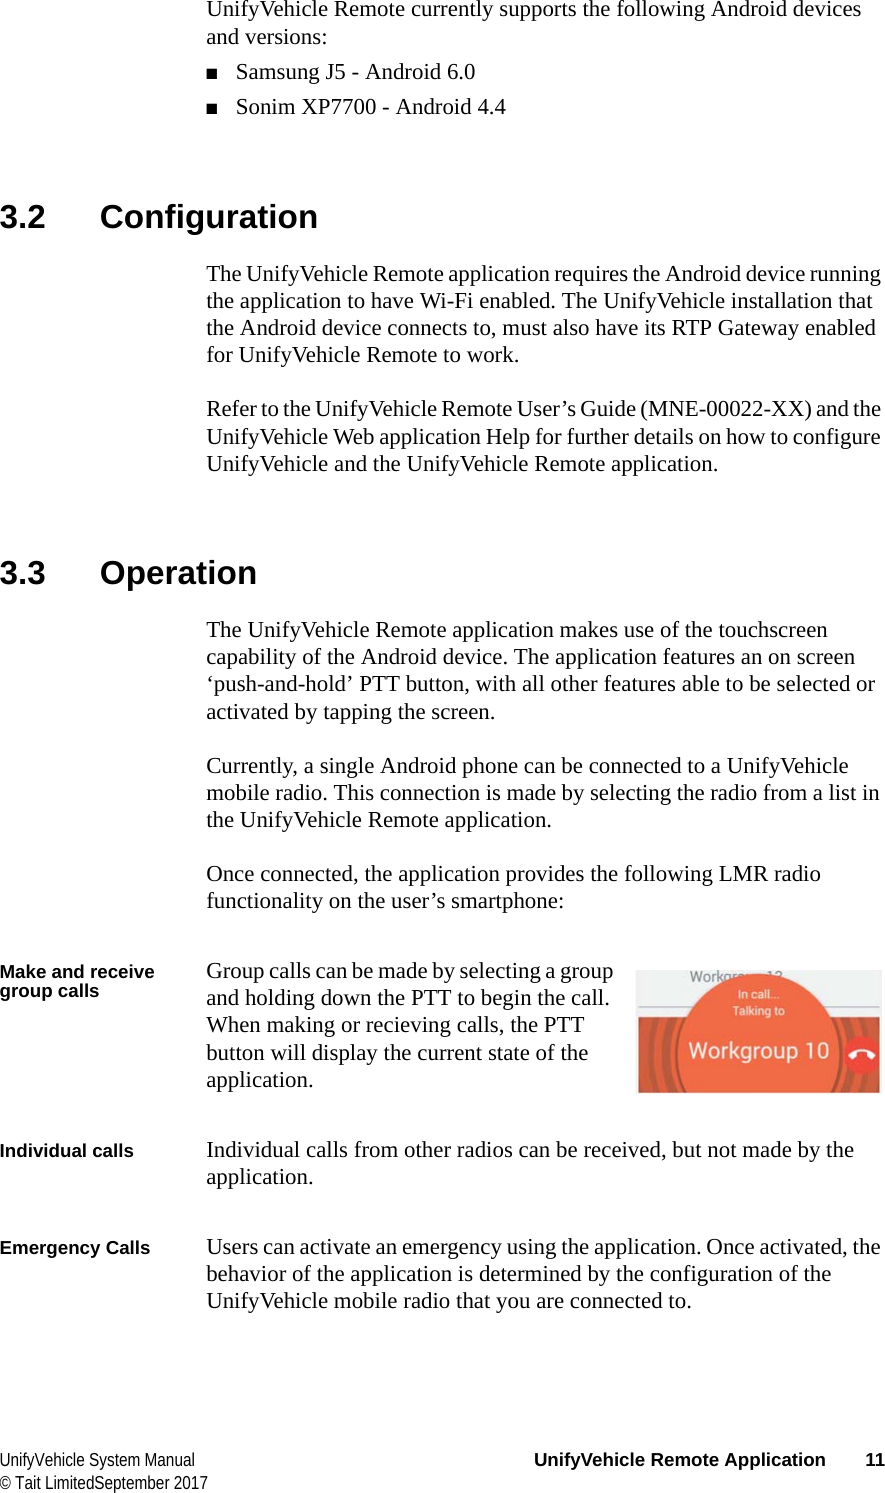  UnifyVehicle System Manual UnifyVehicle Remote Application 11© Tait LimitedSeptember 2017UnifyVehicle Remote currently supports the following Android devices and versions:■Samsung J5 - Android 6.0■Sonim XP7700 - Android 4.43.2 ConfigurationThe UnifyVehicle Remote application requires the Android device running the application to have Wi-Fi enabled. The UnifyVehicle installation that the Android device connects to, must also have its RTP Gateway enabled for UnifyVehicle Remote to work.Refer to the UnifyVehicle Remote User’s Guide (MNE-00022-XX) and the UnifyVehicle Web application Help for further details on how to configure UnifyVehicle and the UnifyVehicle Remote application.3.3 OperationThe UnifyVehicle Remote application makes use of the touchscreen capability of the Android device. The application features an on screen ‘push-and-hold’ PTT button, with all other features able to be selected or activated by tapping the screen.Currently, a single Android phone can be connected to a UnifyVehicle mobile radio. This connection is made by selecting the radio from a list in the UnifyVehicle Remote application.Once connected, the application provides the following LMR radio functionality on the user’s smartphone:Make and receive group calls Group calls can be made by selecting a group and holding down the PTT to begin the call. When making or recieving calls, the PTT button will display the current state of the application.Individual calls Individual calls from other radios can be received, but not made by the application.Emergency Calls Users can activate an emergency using the application. Once activated, the behavior of the application is determined by the configuration of the UnifyVehicle mobile radio that you are connected to.